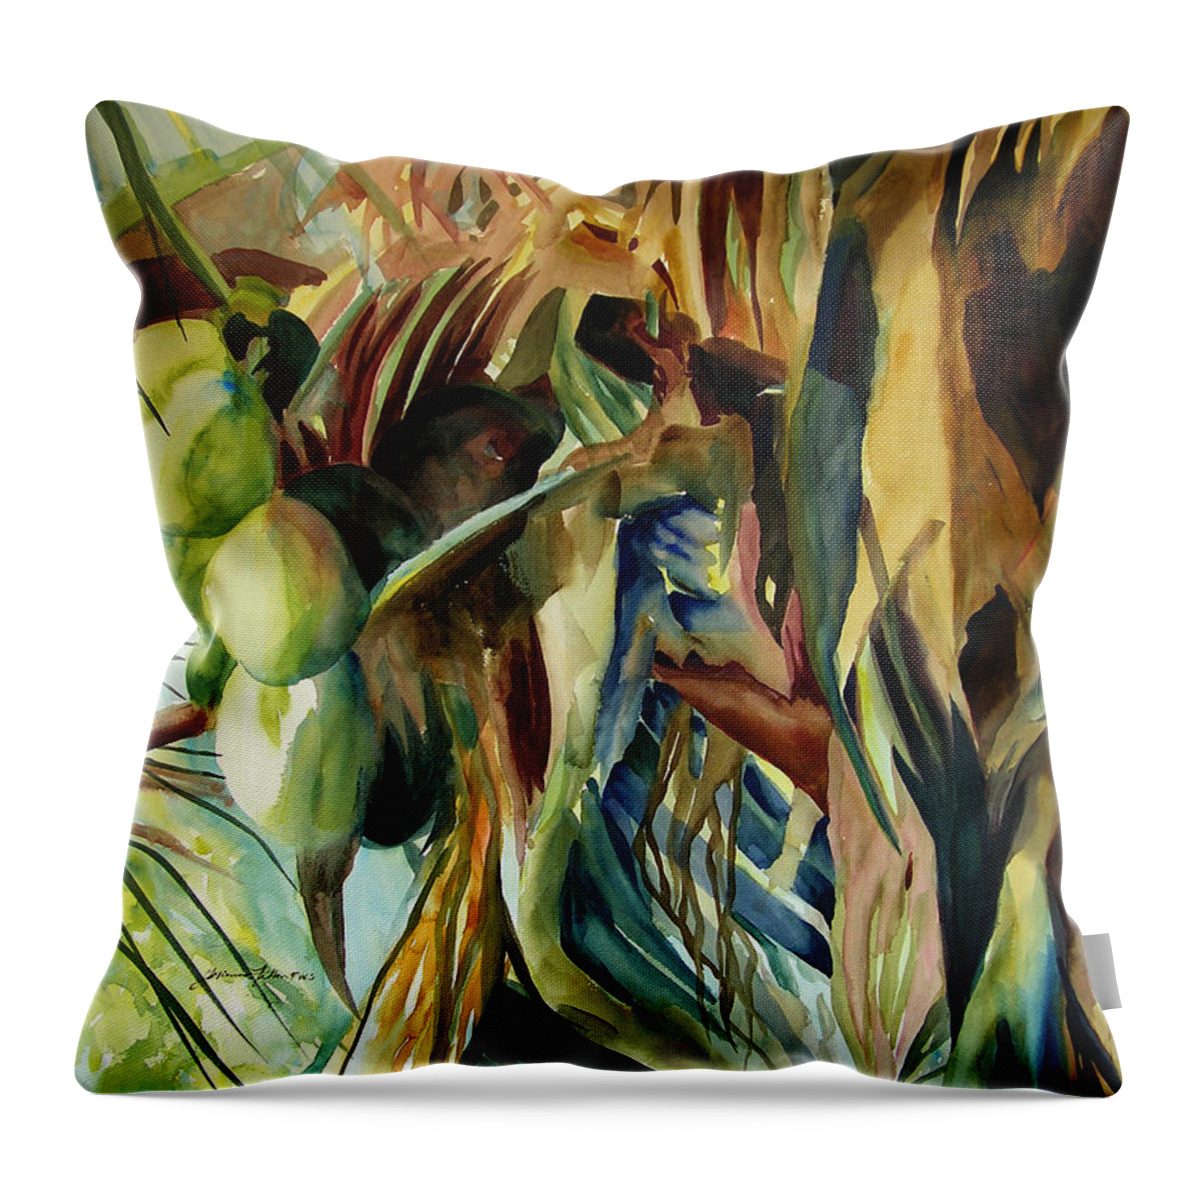 Original Paintings Throw Pillow featuring the painting Coconuts and palm fronds 5-16-11 julianne felton by Julianne Felton